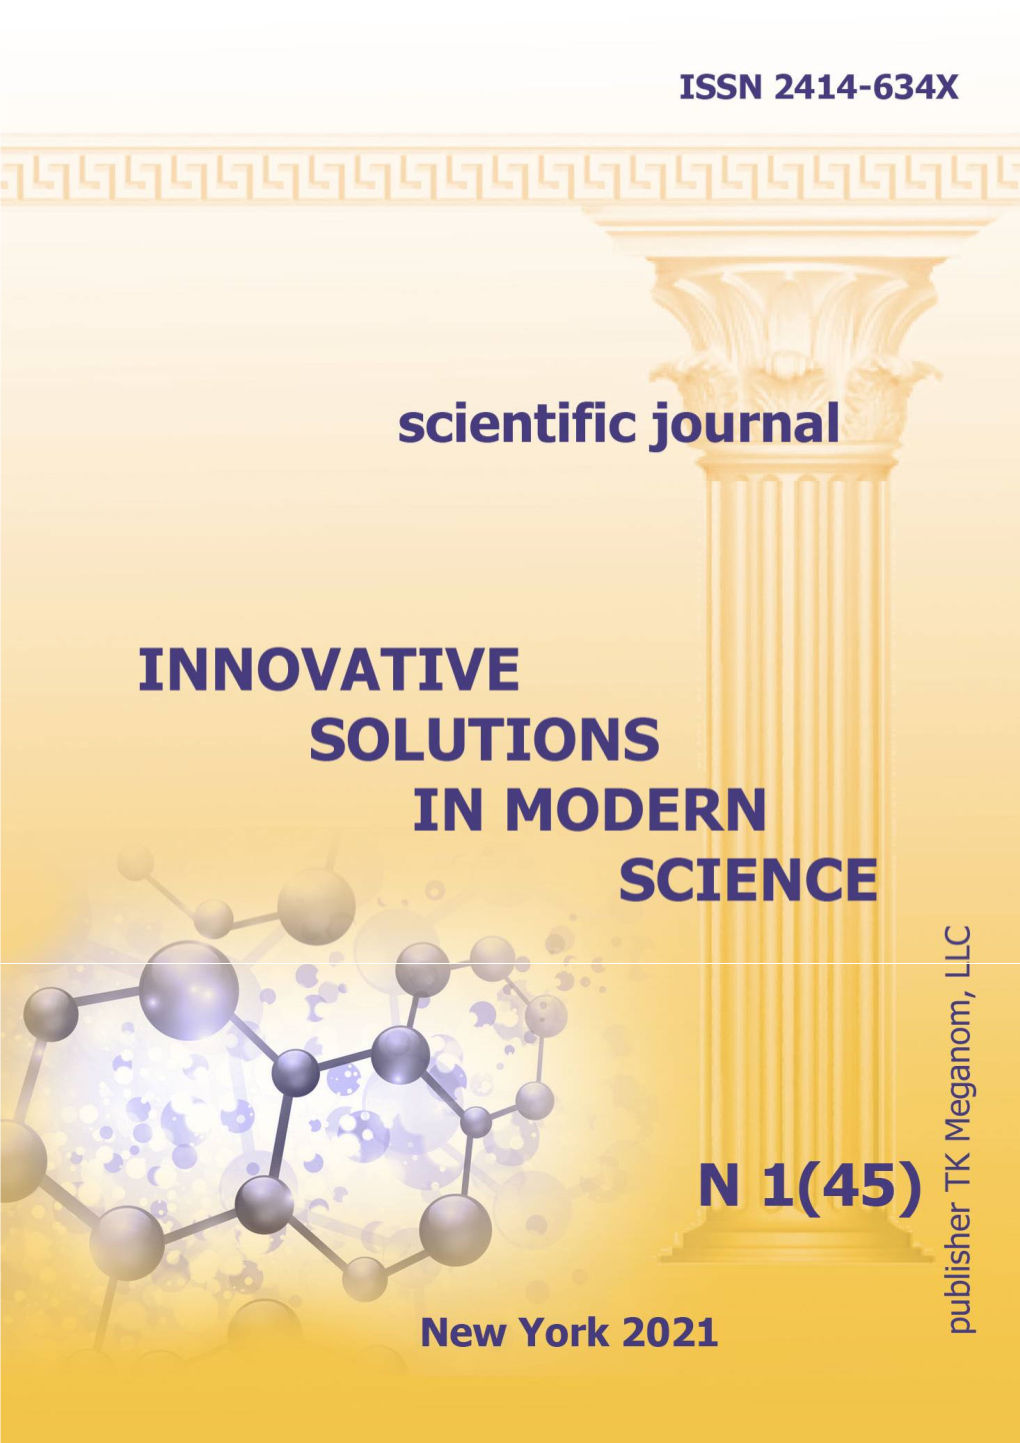 Innovative Solutions in Modern Science № 1(45), 2021